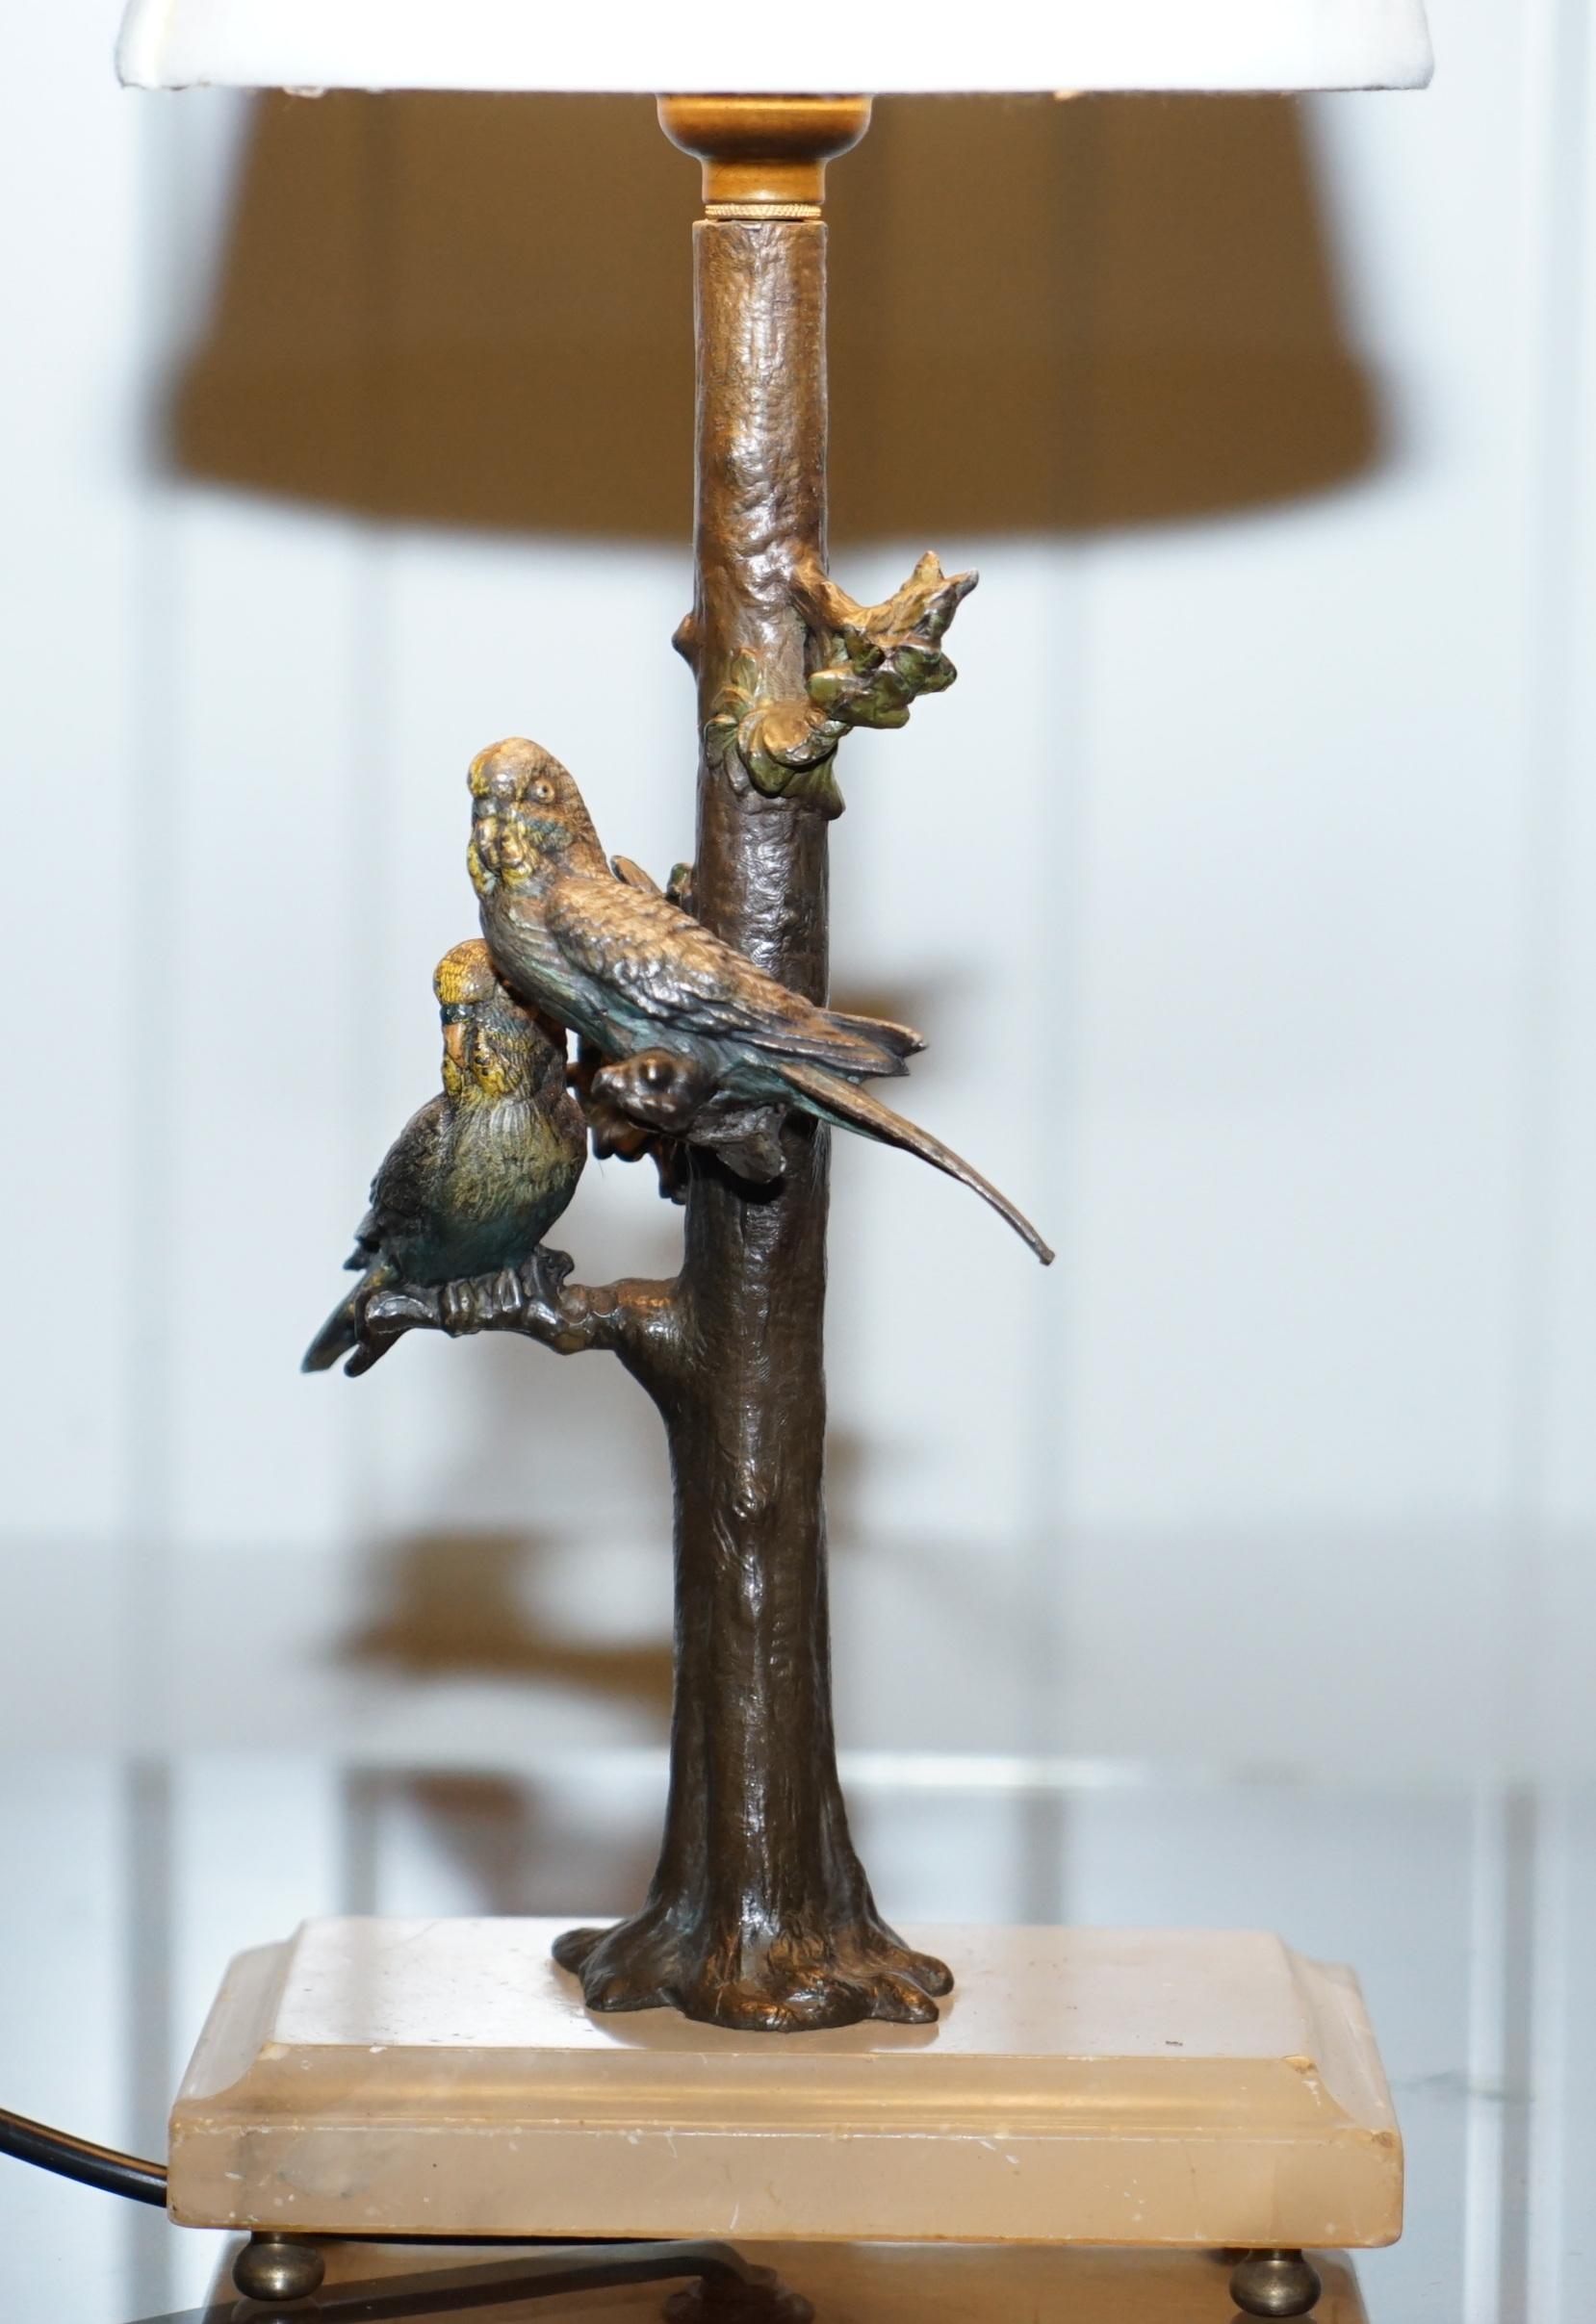 We are delighted to offer for sale this absolutely stunning circa 1920 cold painted Austrian bronze table lamp of birds of paradise in a tree

This is sublime, the casting of the bronze is exquisite as is the hand painting which has beautifully